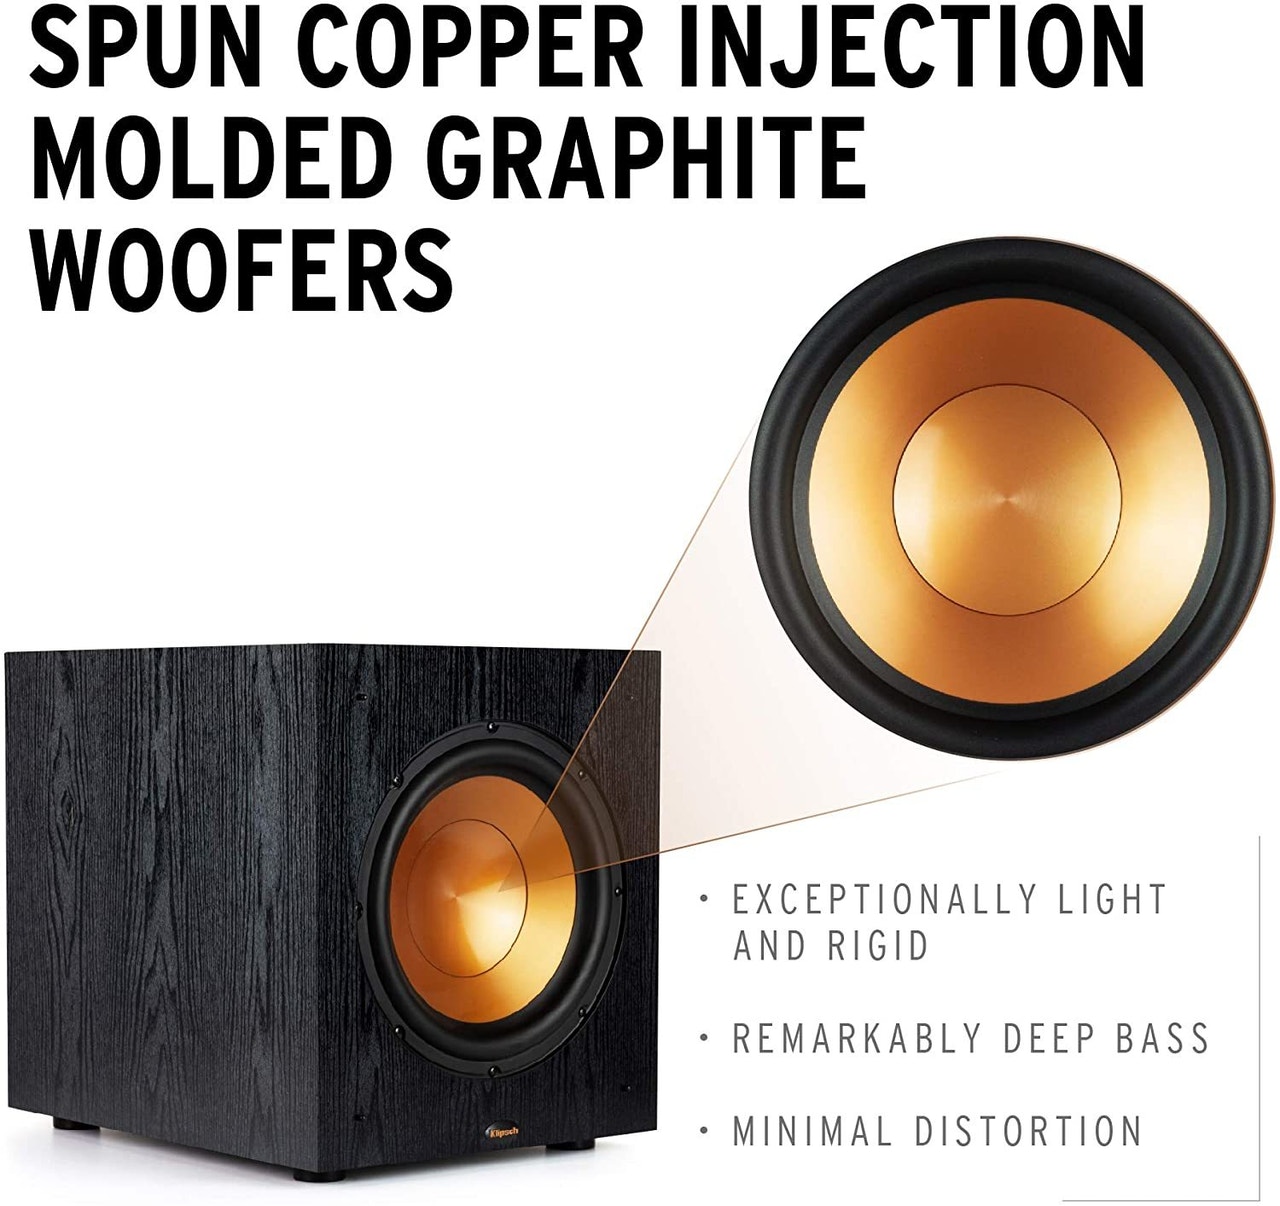 Klipsch Synergy Black Label Sub-100 - Subwoofer - 10" - black with copper accents - image 2 of 7